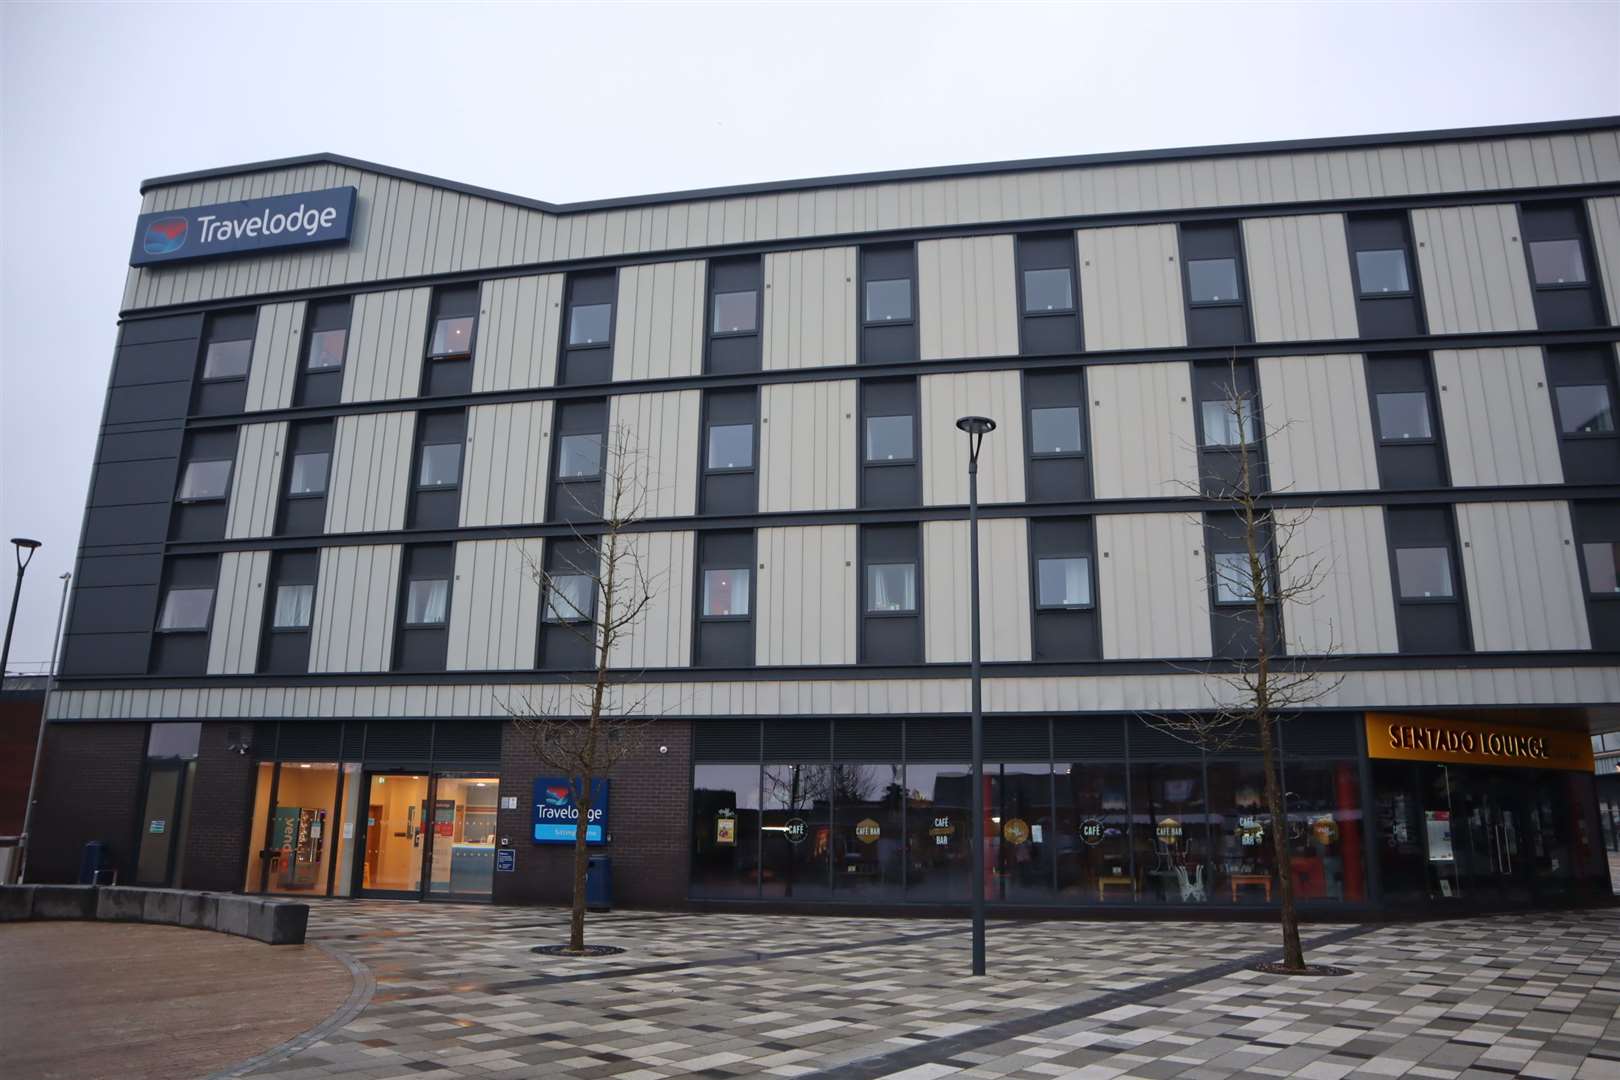 Travelodge have announced plans to open 11 new hotels in Kent